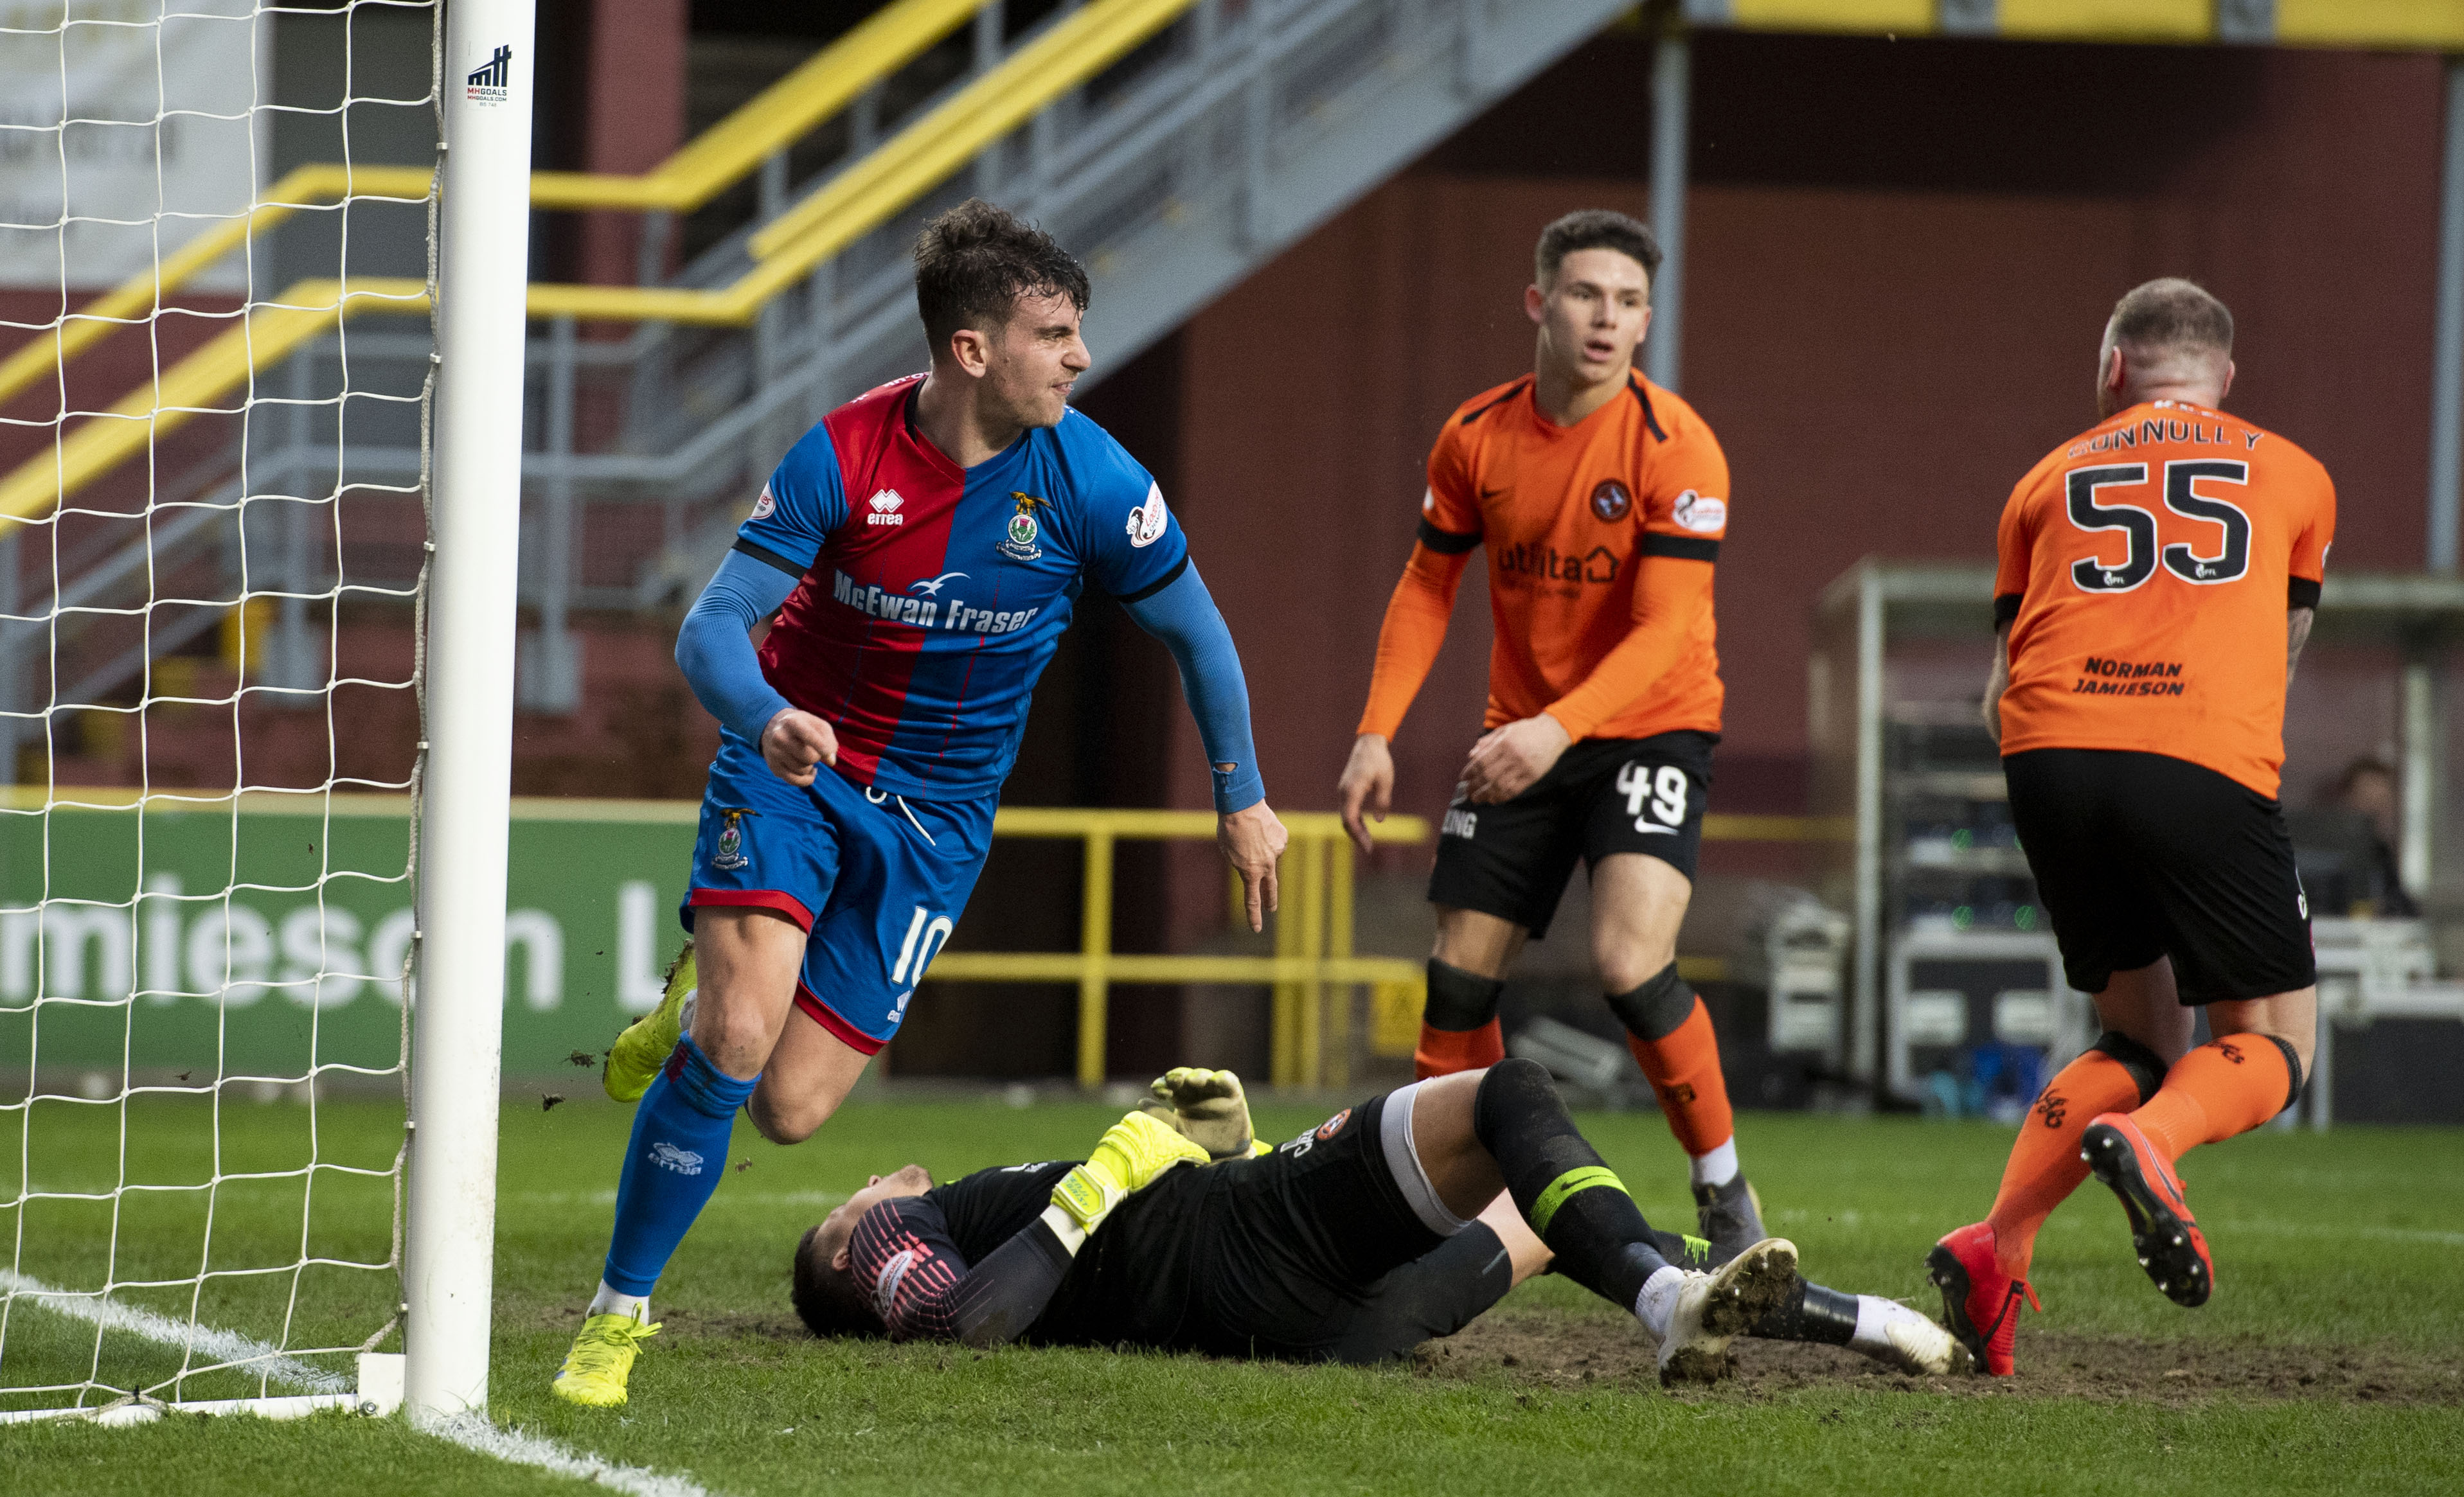 03/03/19 WILLIAM HILL SCOTTISH CUP QUARTER FINAL
DUNDEE UNITED V INVERNESS CT
TANNADICE - DUNDEE
Aaron Doran turns away to celebrate after scoring late on for Inverness